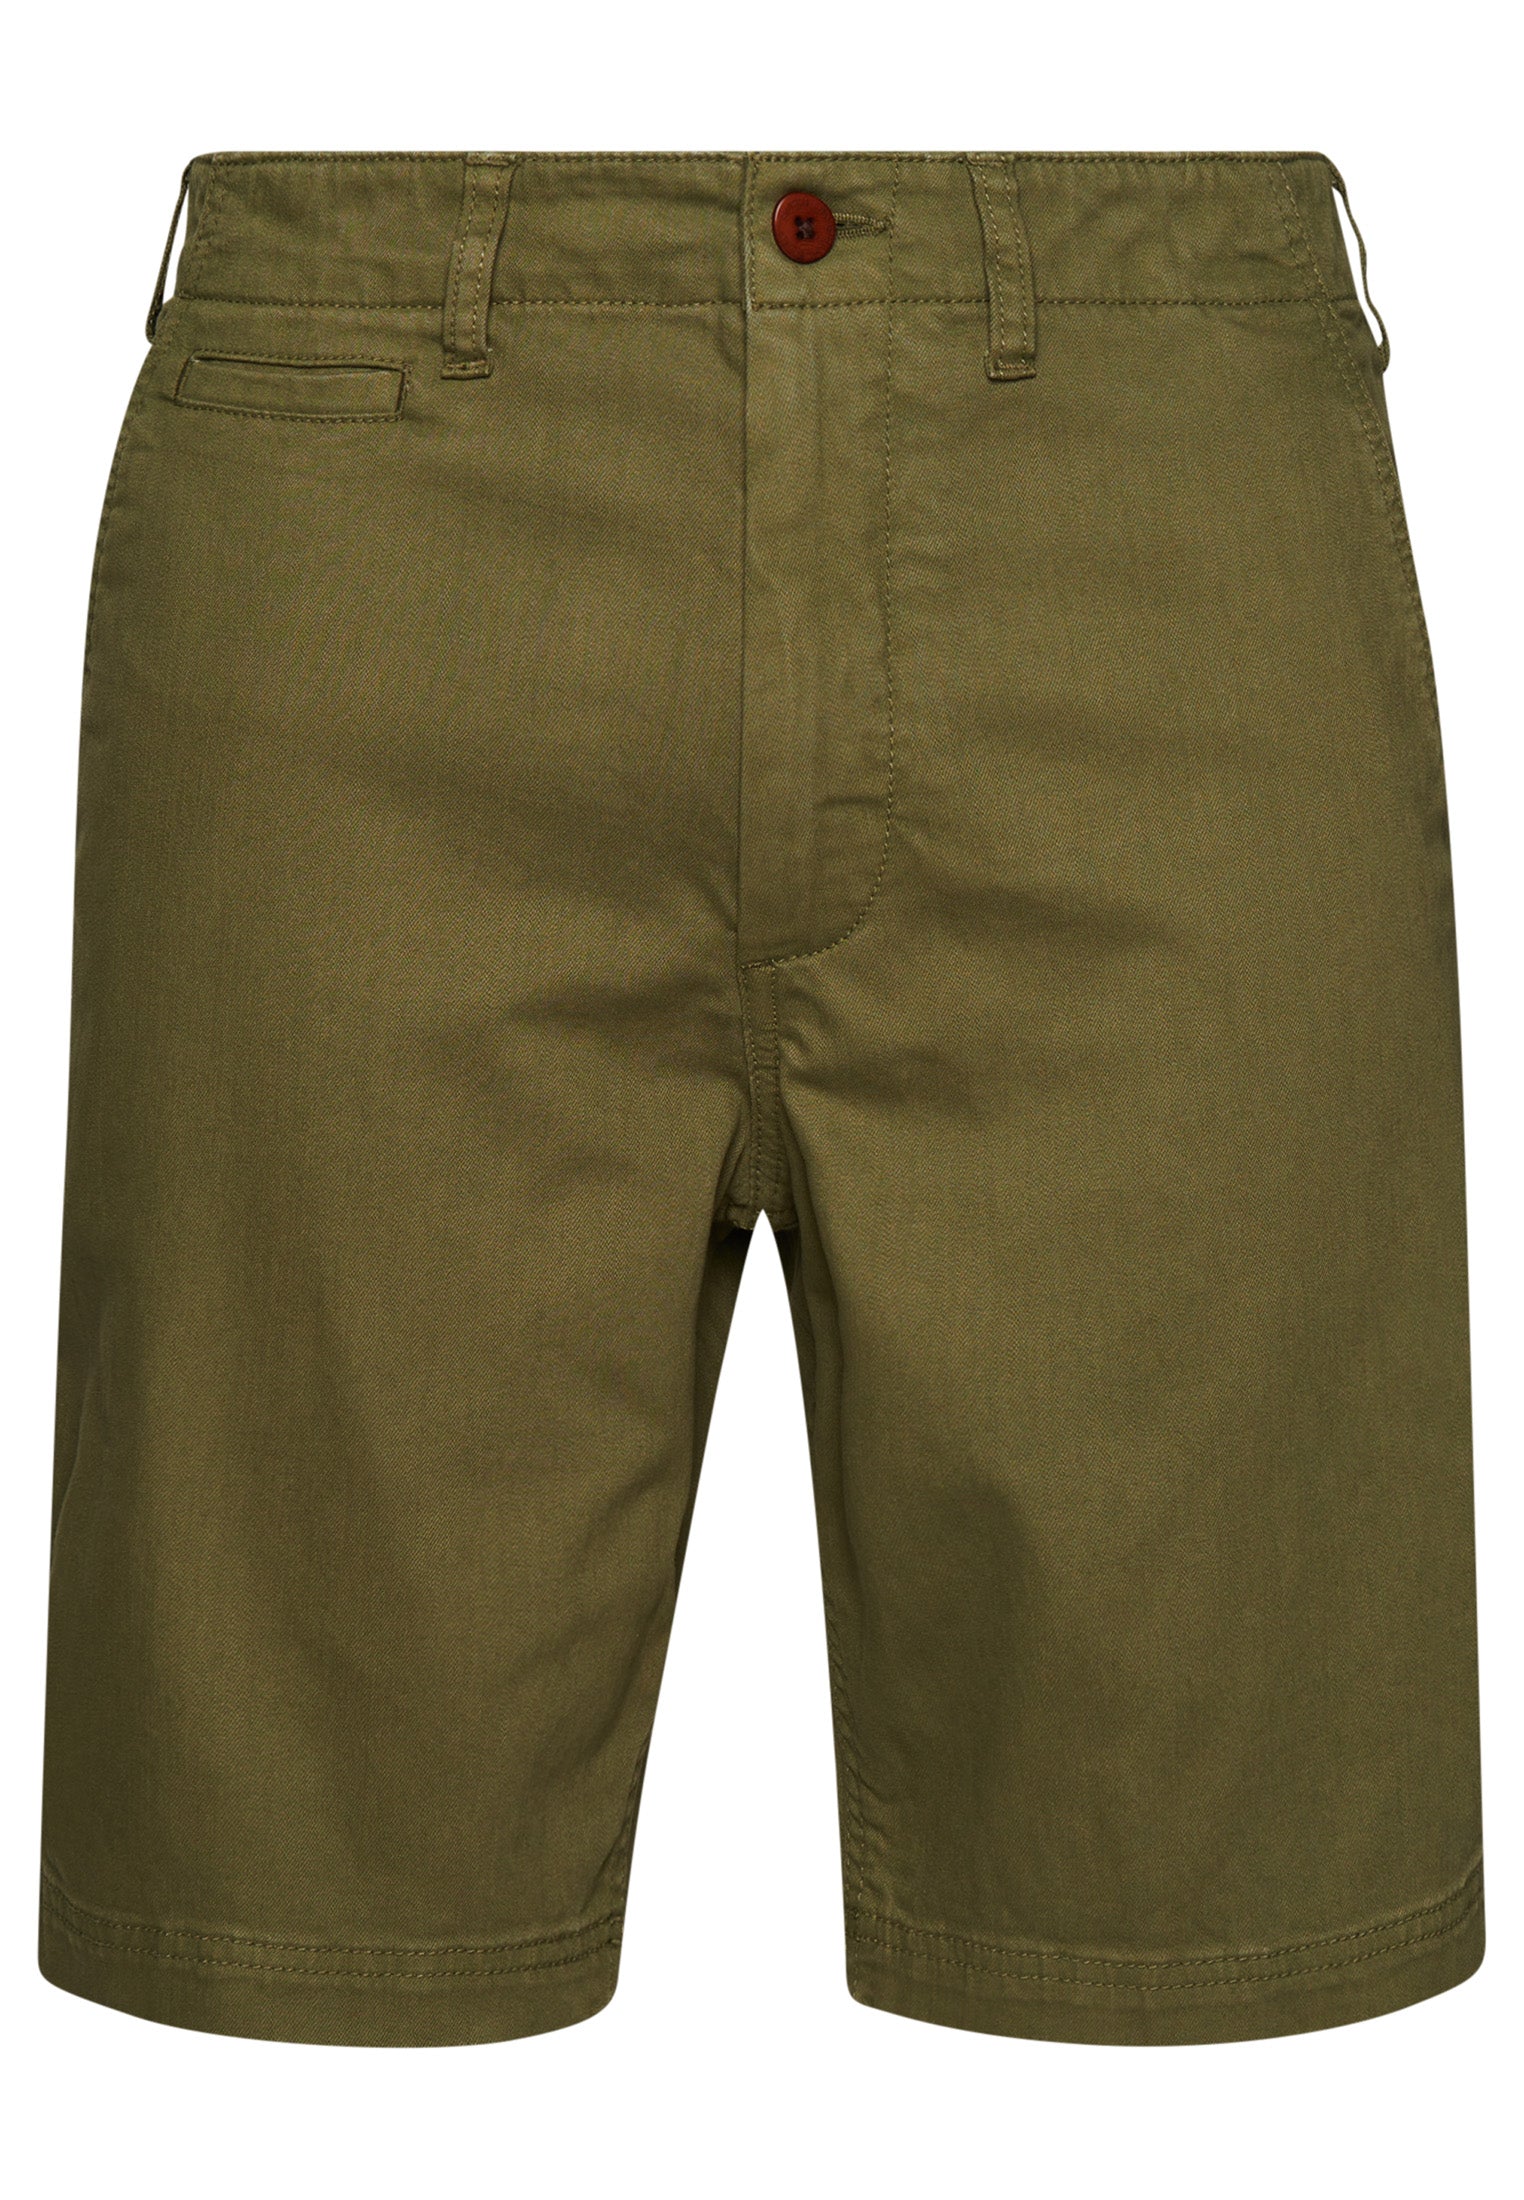 Men's Vintage Officer Chino Short Olive Khaki-Front View